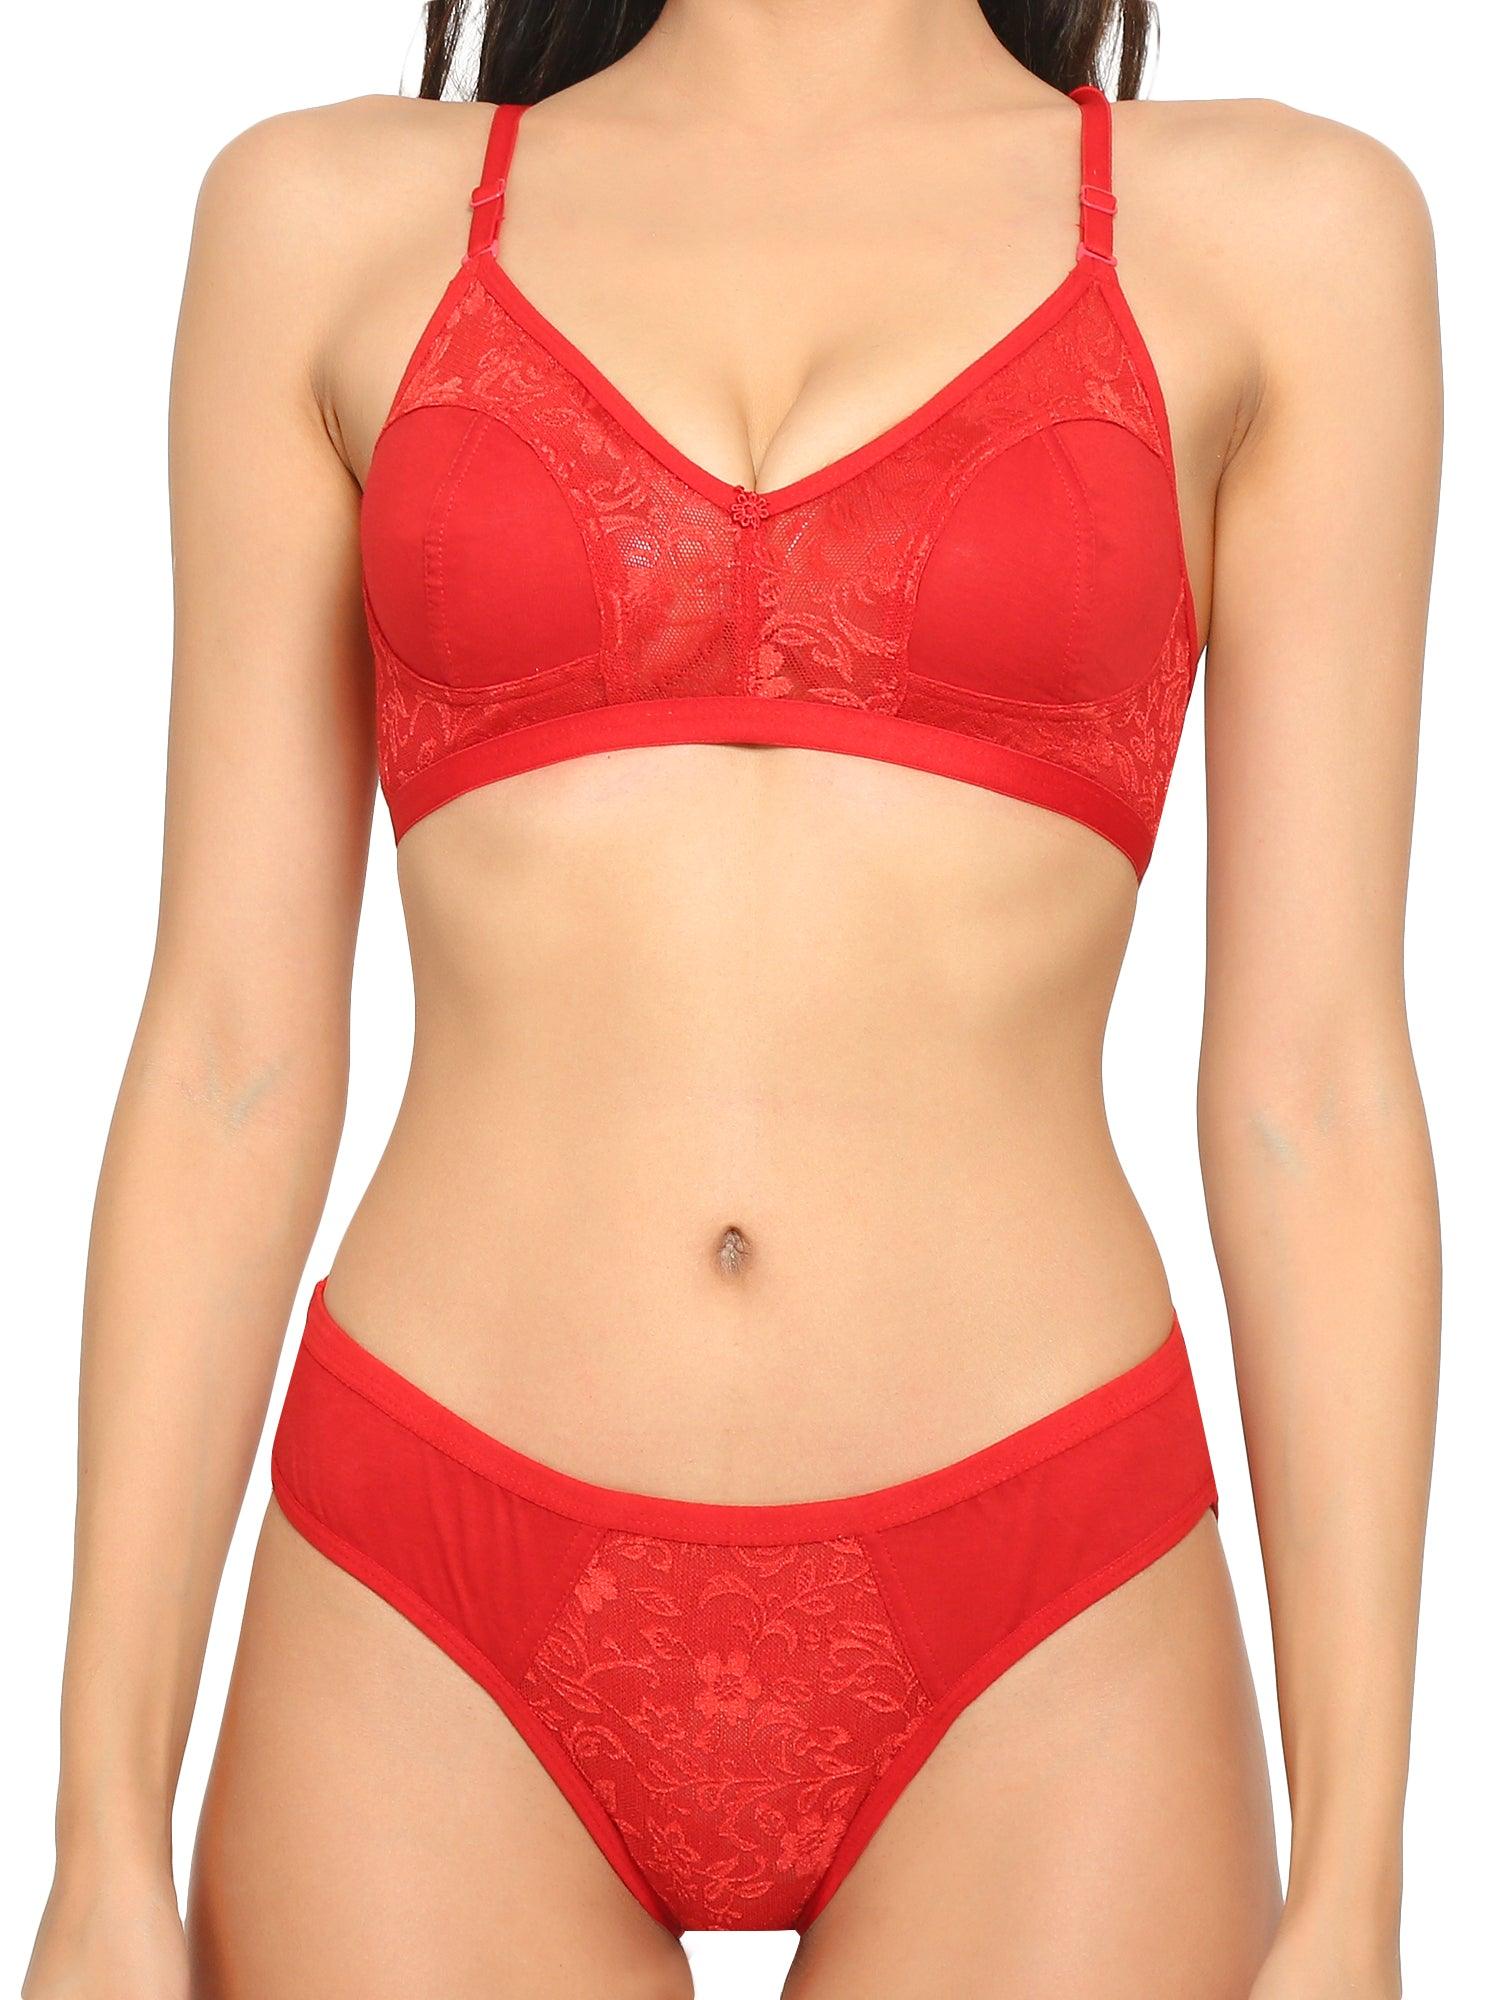 Bridal and Honeymoon Bra and Panty Set - Red, Lingerie, Bra and